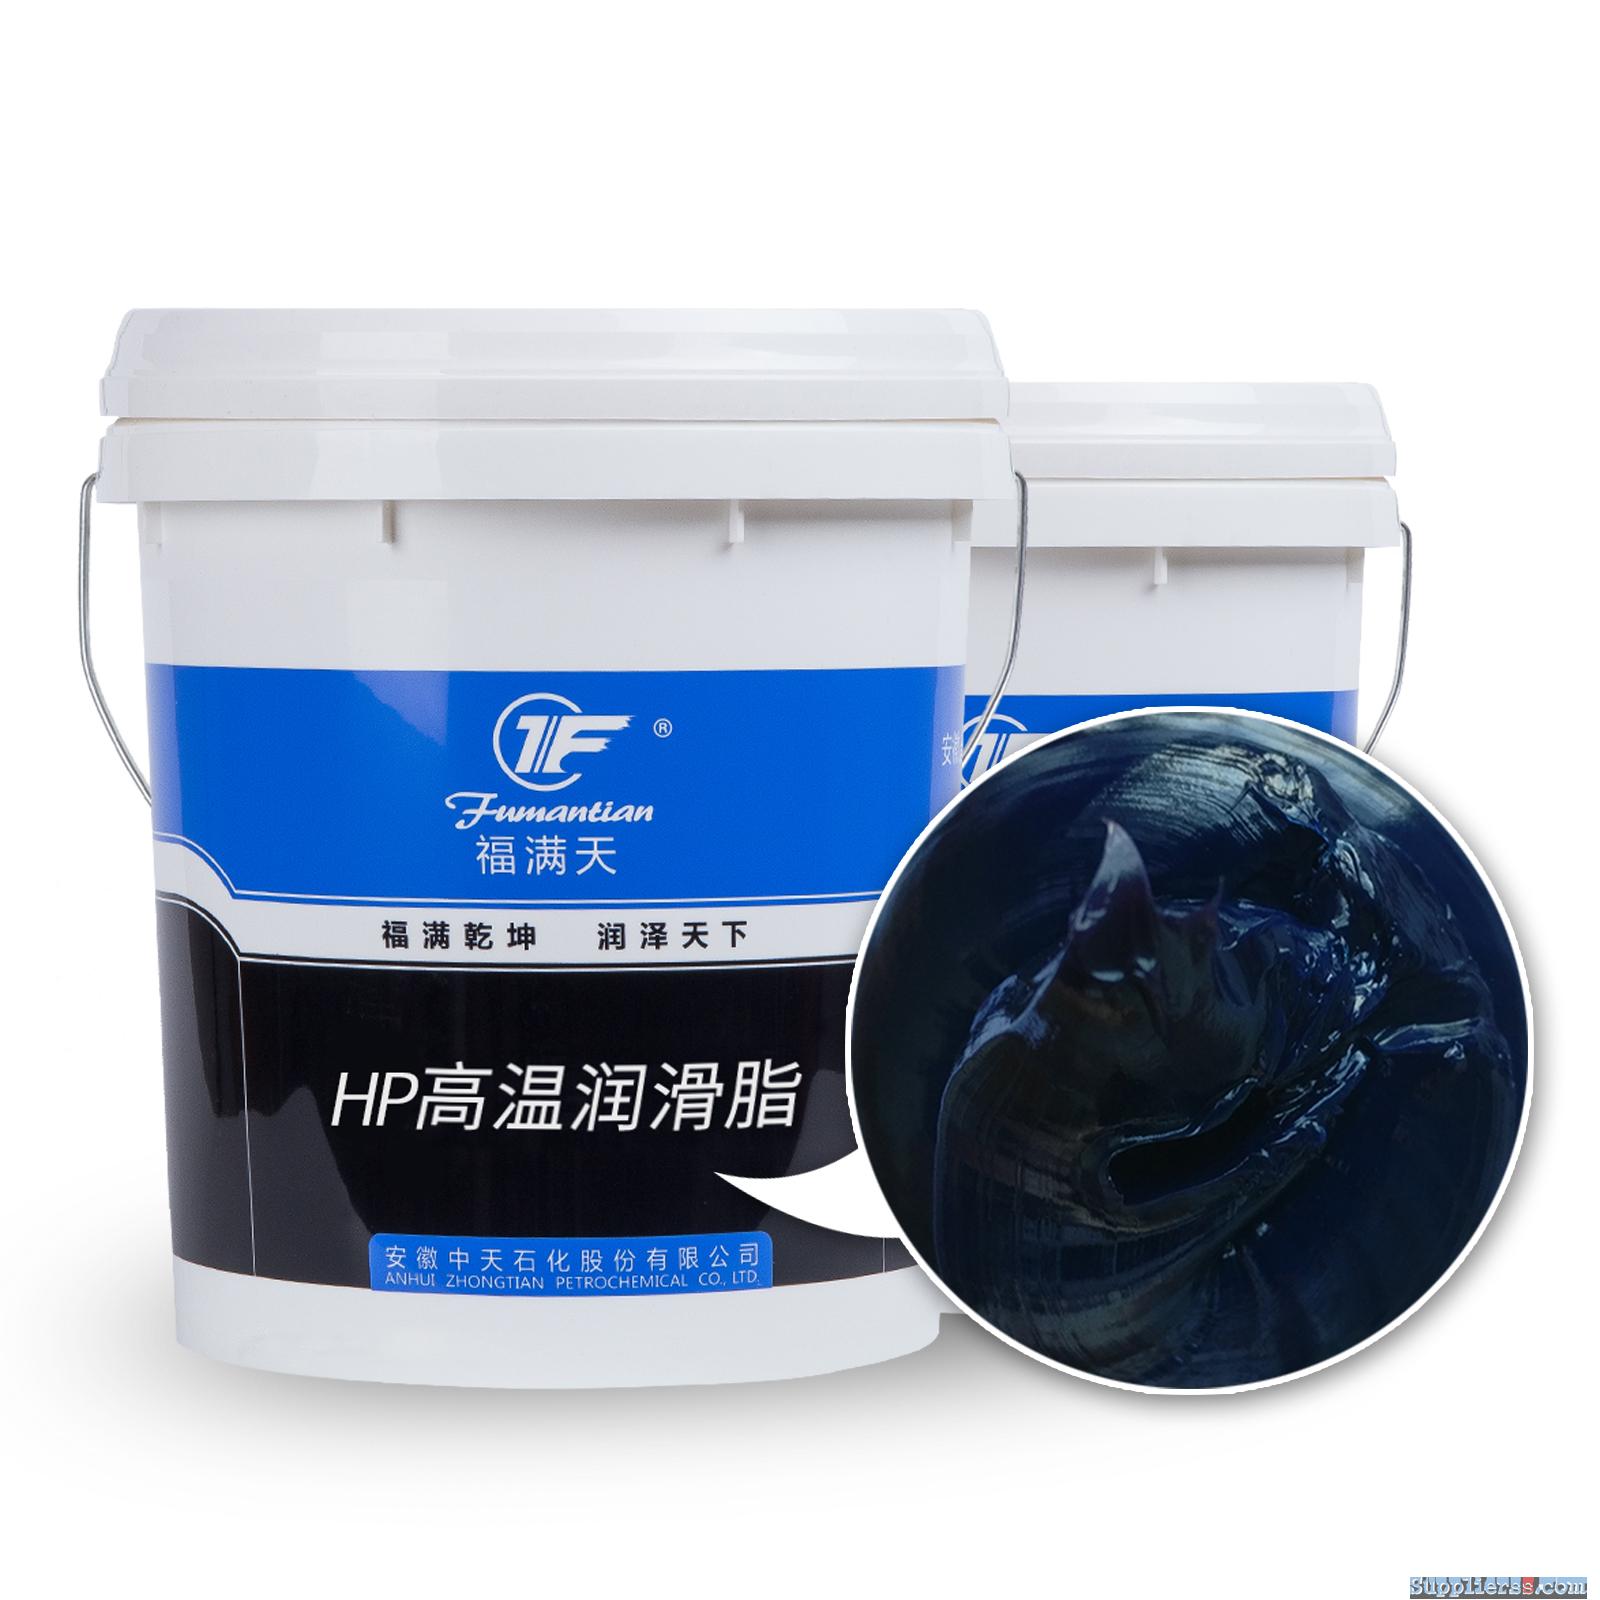 High-temperature Grease